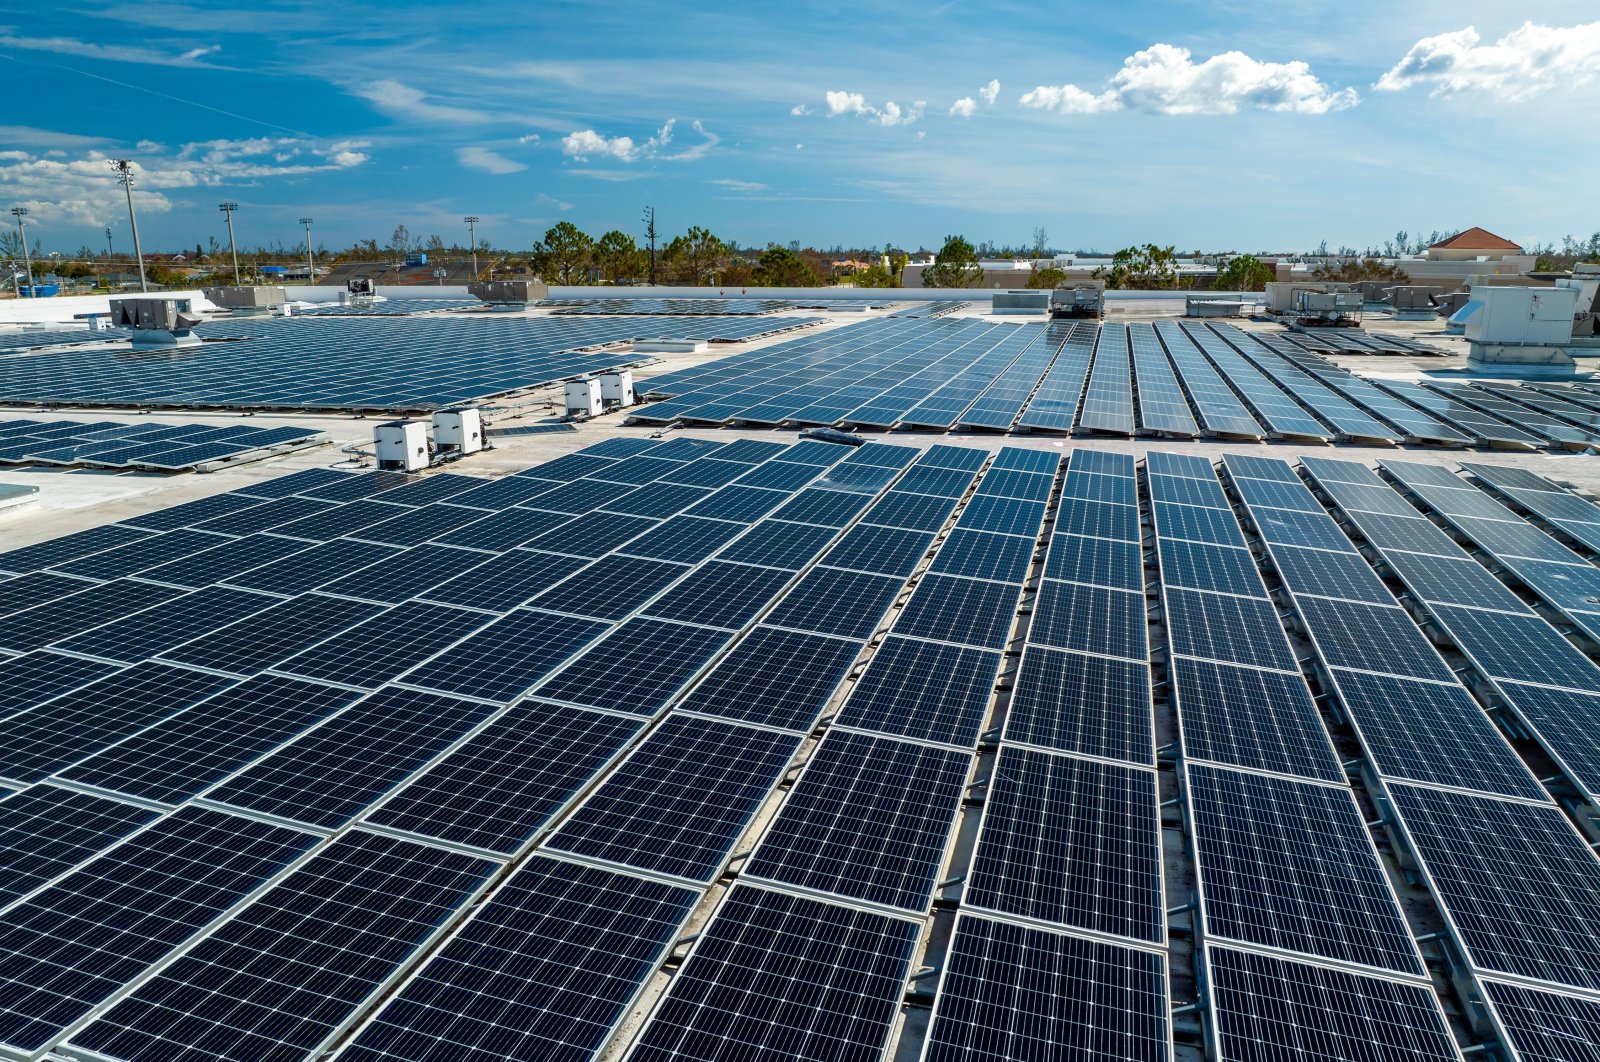 Aerial view of solar panels mounted on an industrial building roof used in producing clean electricity. (Shutterstock Photo)